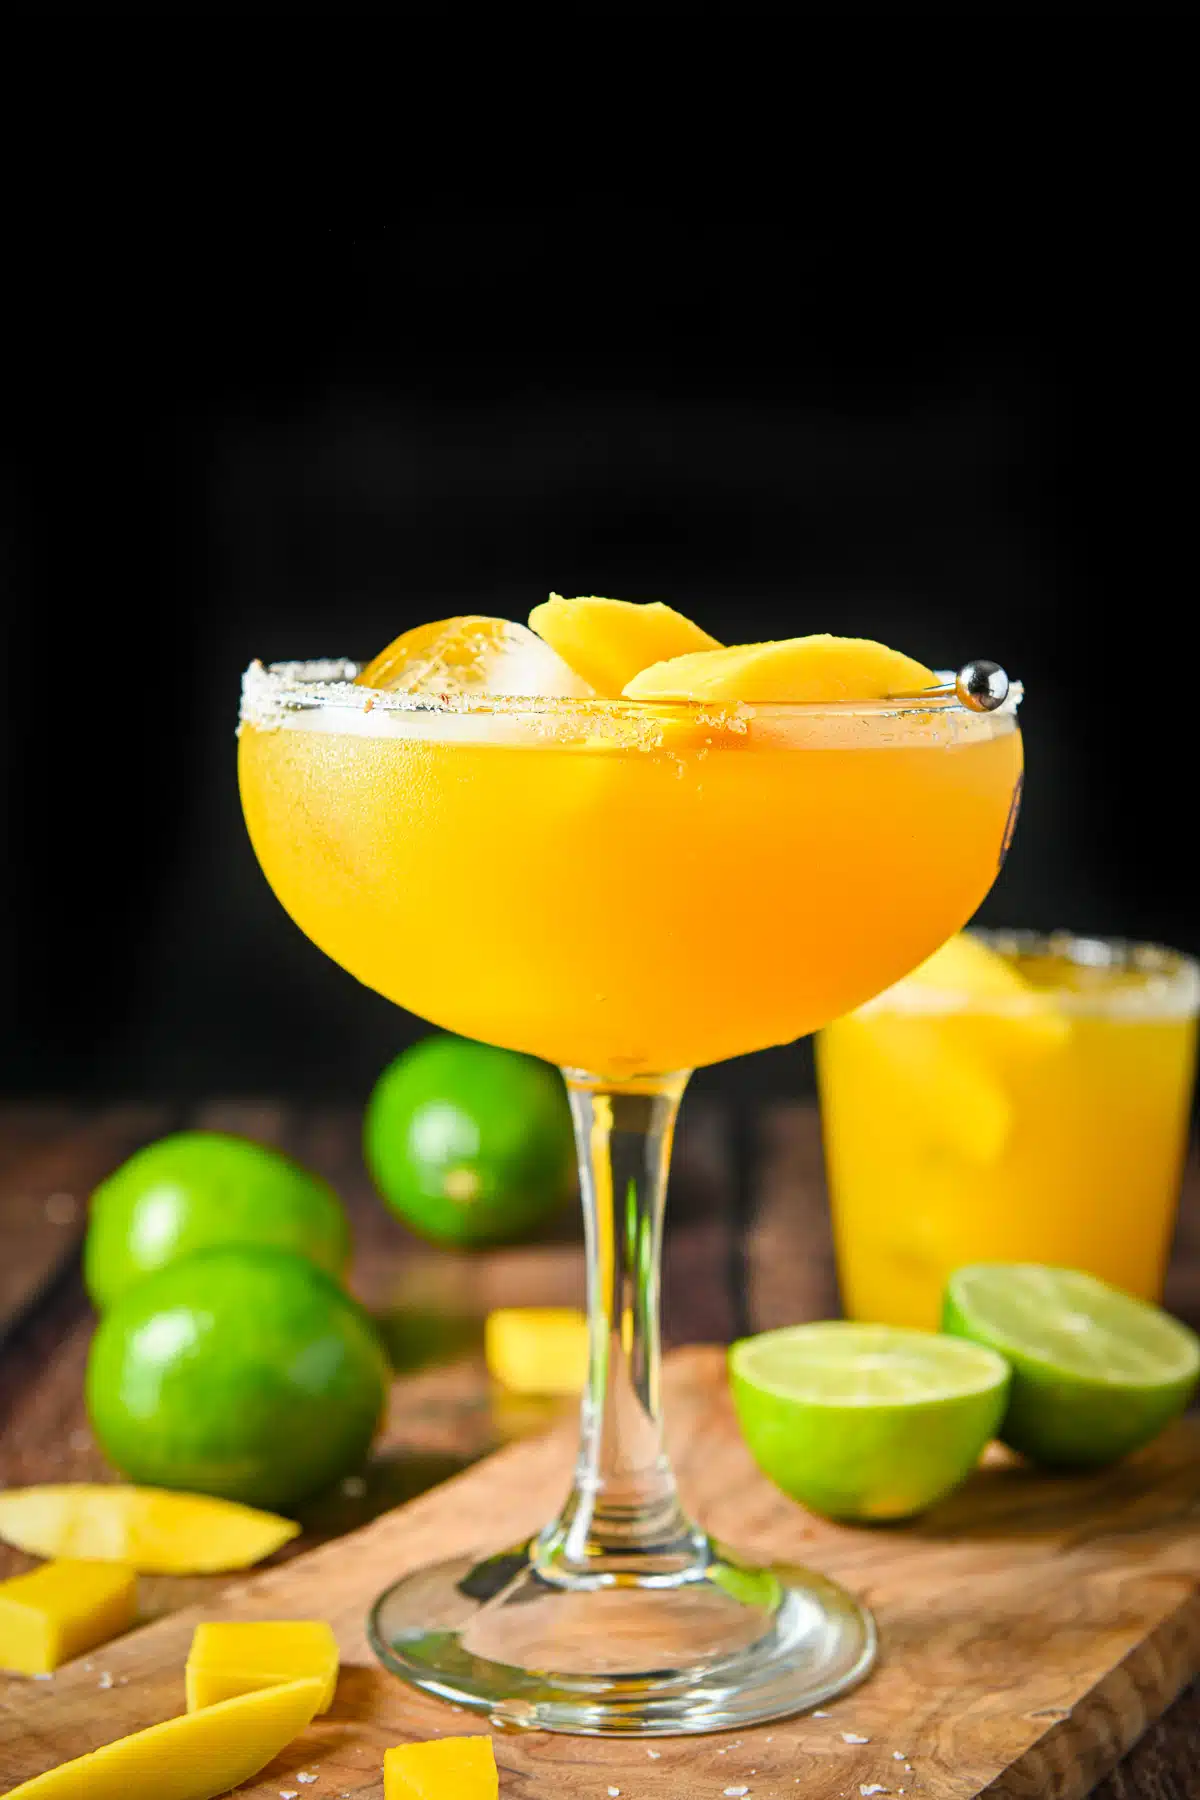 Vertical view of a bowl margarita glass filled with the mango drink with limes and mangos